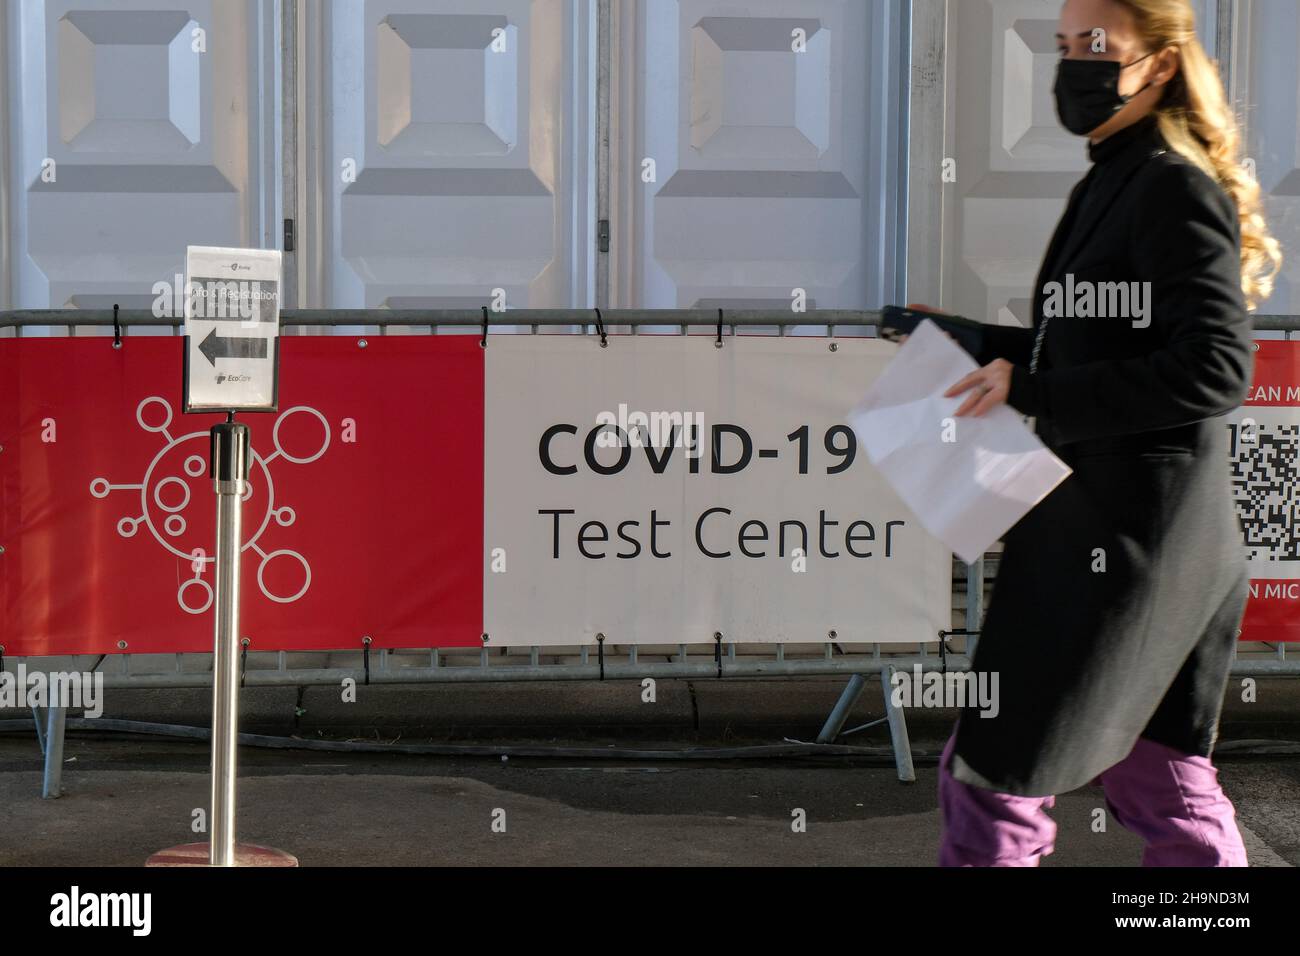 Brussels, Belgium. 7th Dec, 2021. A woman prepares to receive test at a COVID-19 test center in Brussels, Belgium, Dec. 7, 2021. Hans Kluge, the WHO's regional director for Europe, on Tuesday urged governments and citizens in Europe to take immediate action to halt the spread of the COVID-19 pandemic by implementing five pandemic stabilizers to keep the mortality rate down. Credit: Zhang Cheng/Xinhua/Alamy Live News Stock Photo